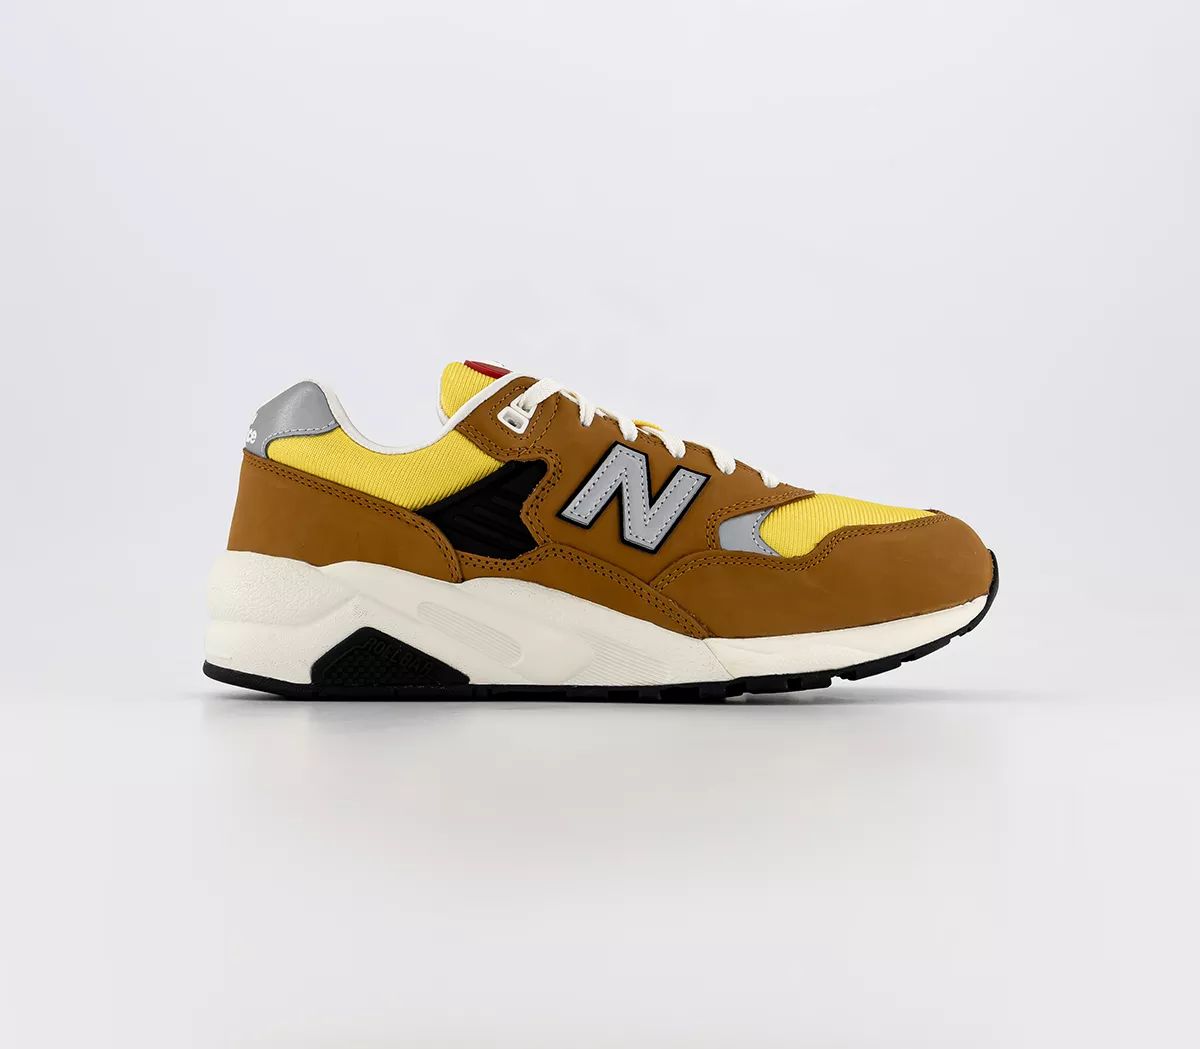 New Balance MT580 Trainers Workwear Honeycomb - Men's Trainers | Offspring (UK)